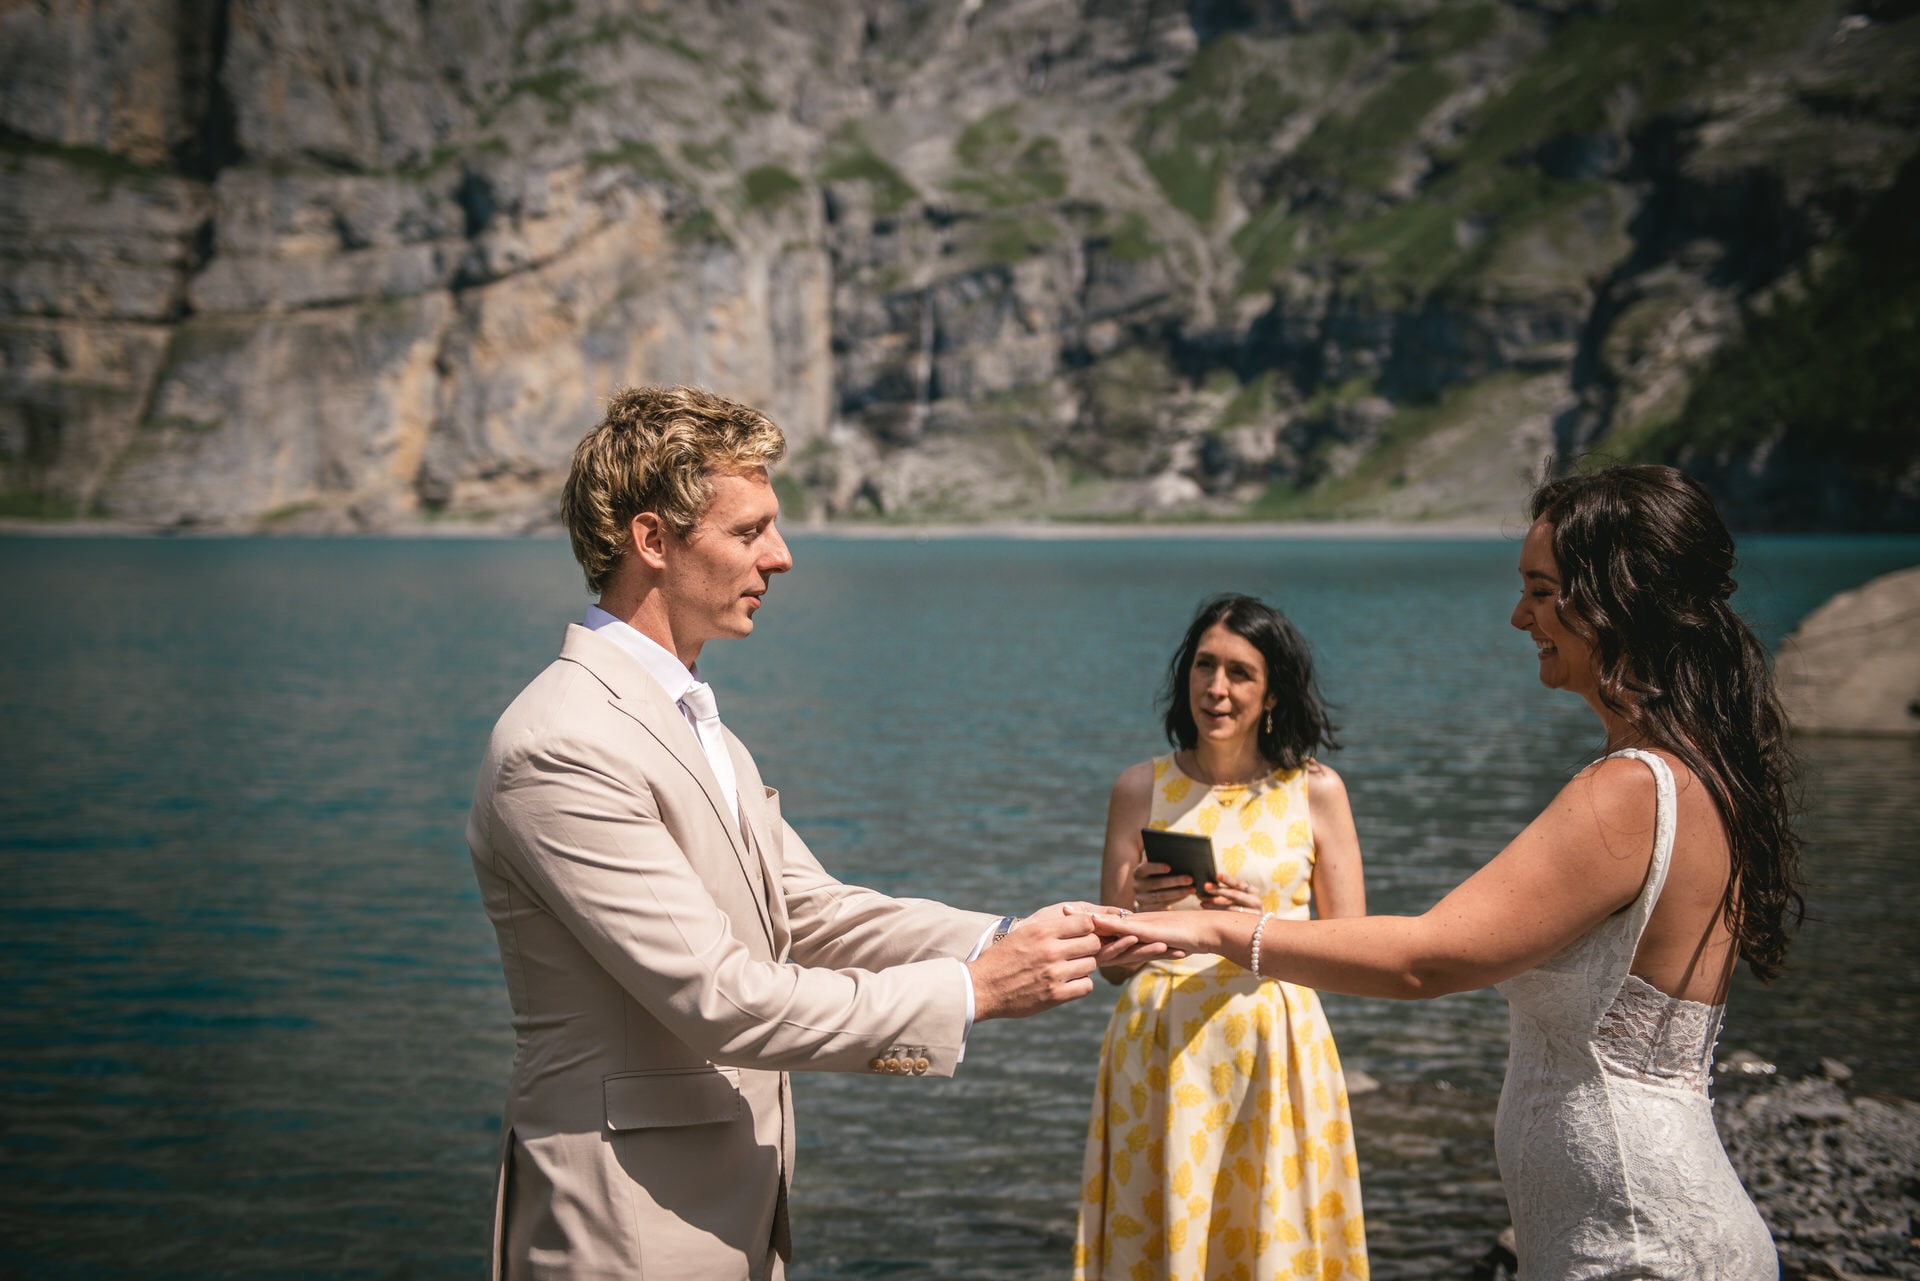 Vows whispered in the heart of nature - a heartfelt hiking elopement.